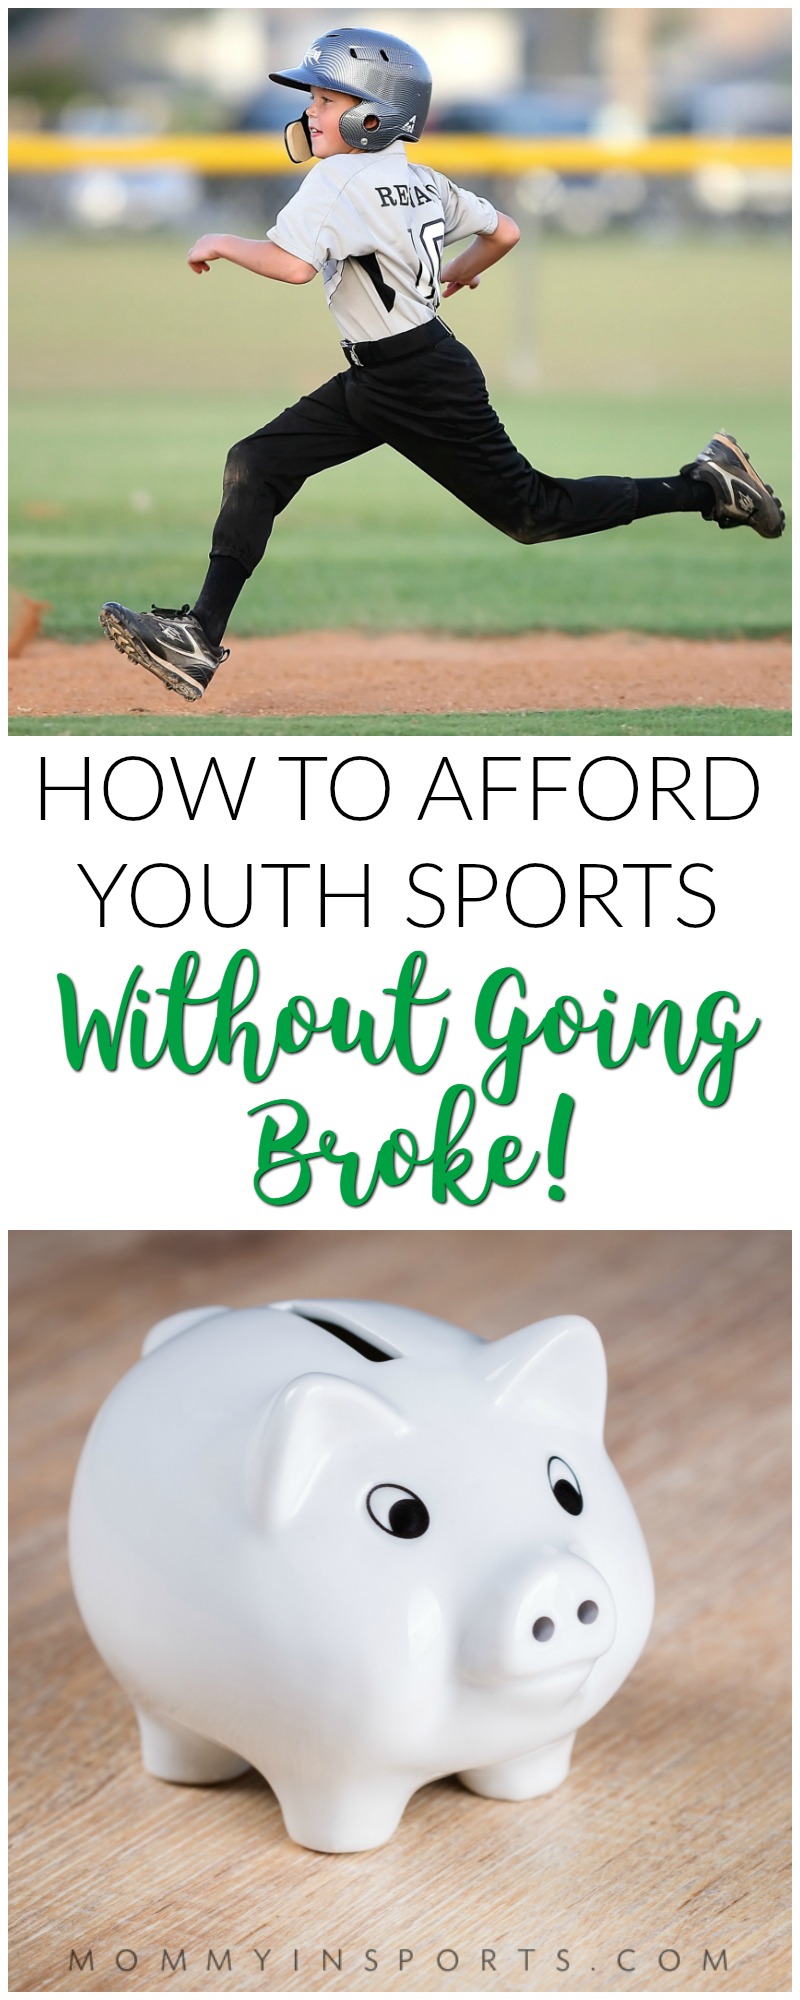 Do you struggle with the high costs of youth sports, plus all the equipment and clothing needed? Check out these tips to help families afford sports!